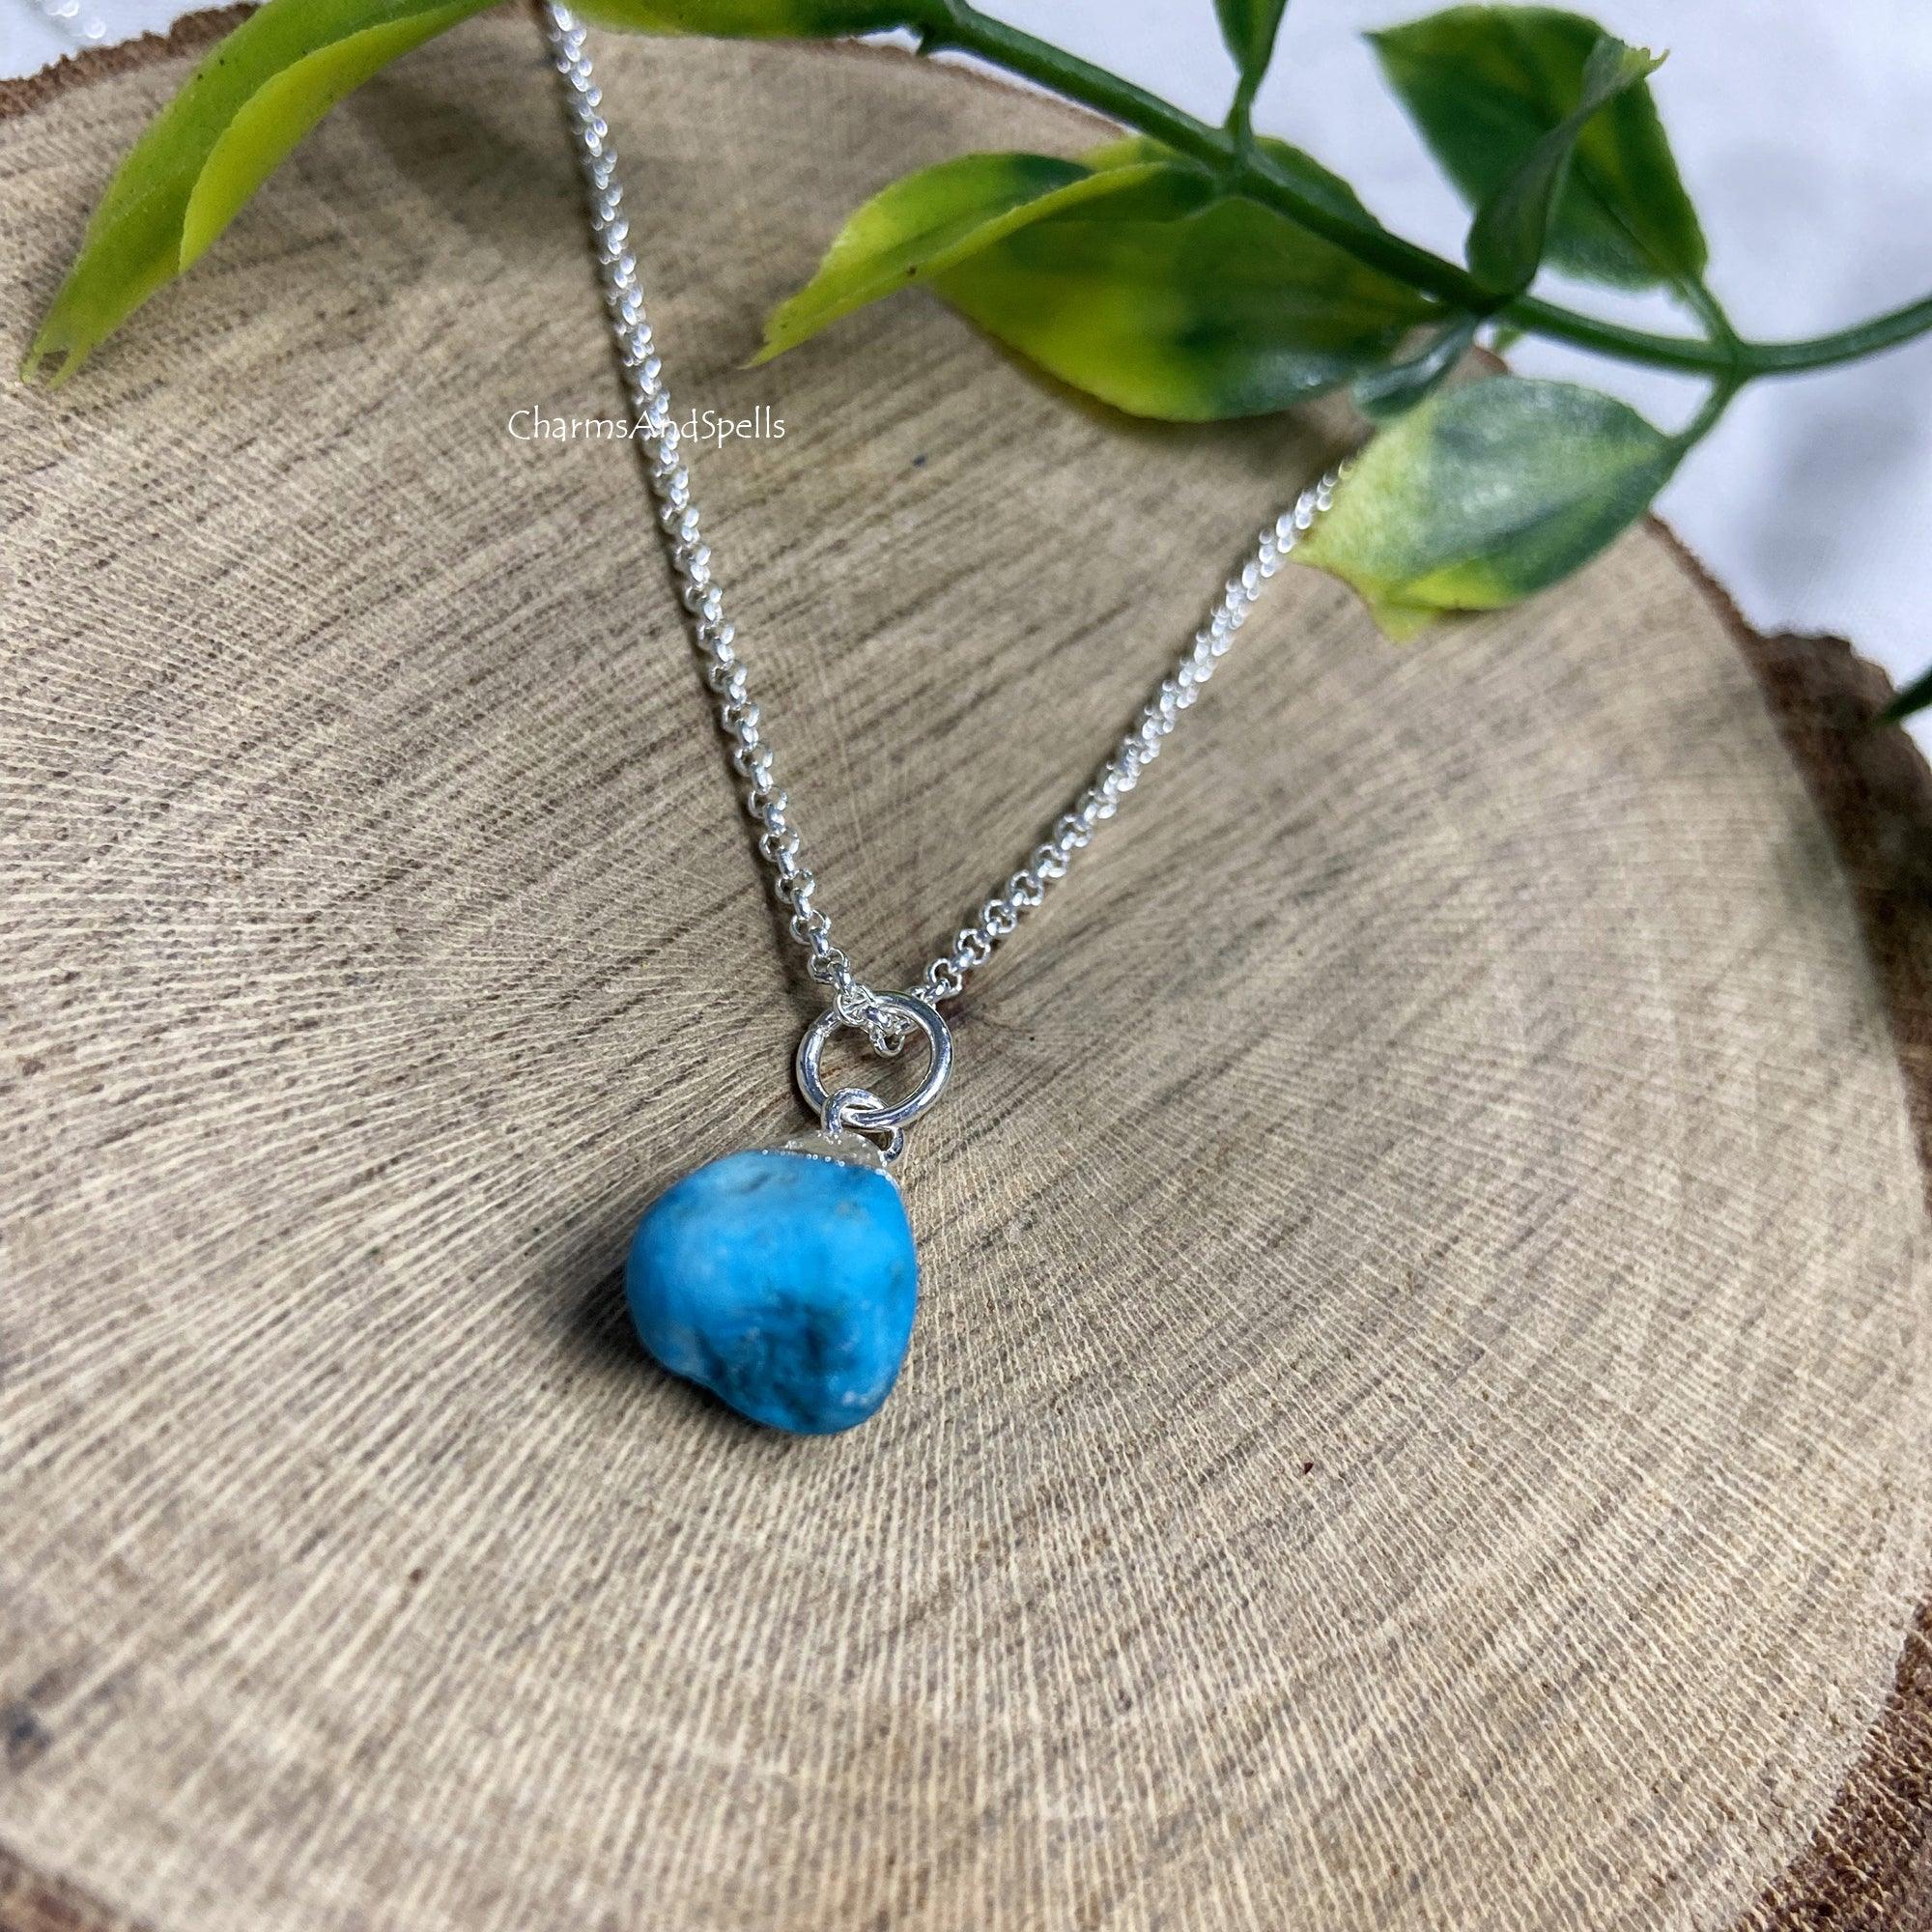 Dainty Turquoise Stone Beads Bar Pendant Necklace Chain Birthstone Necklace